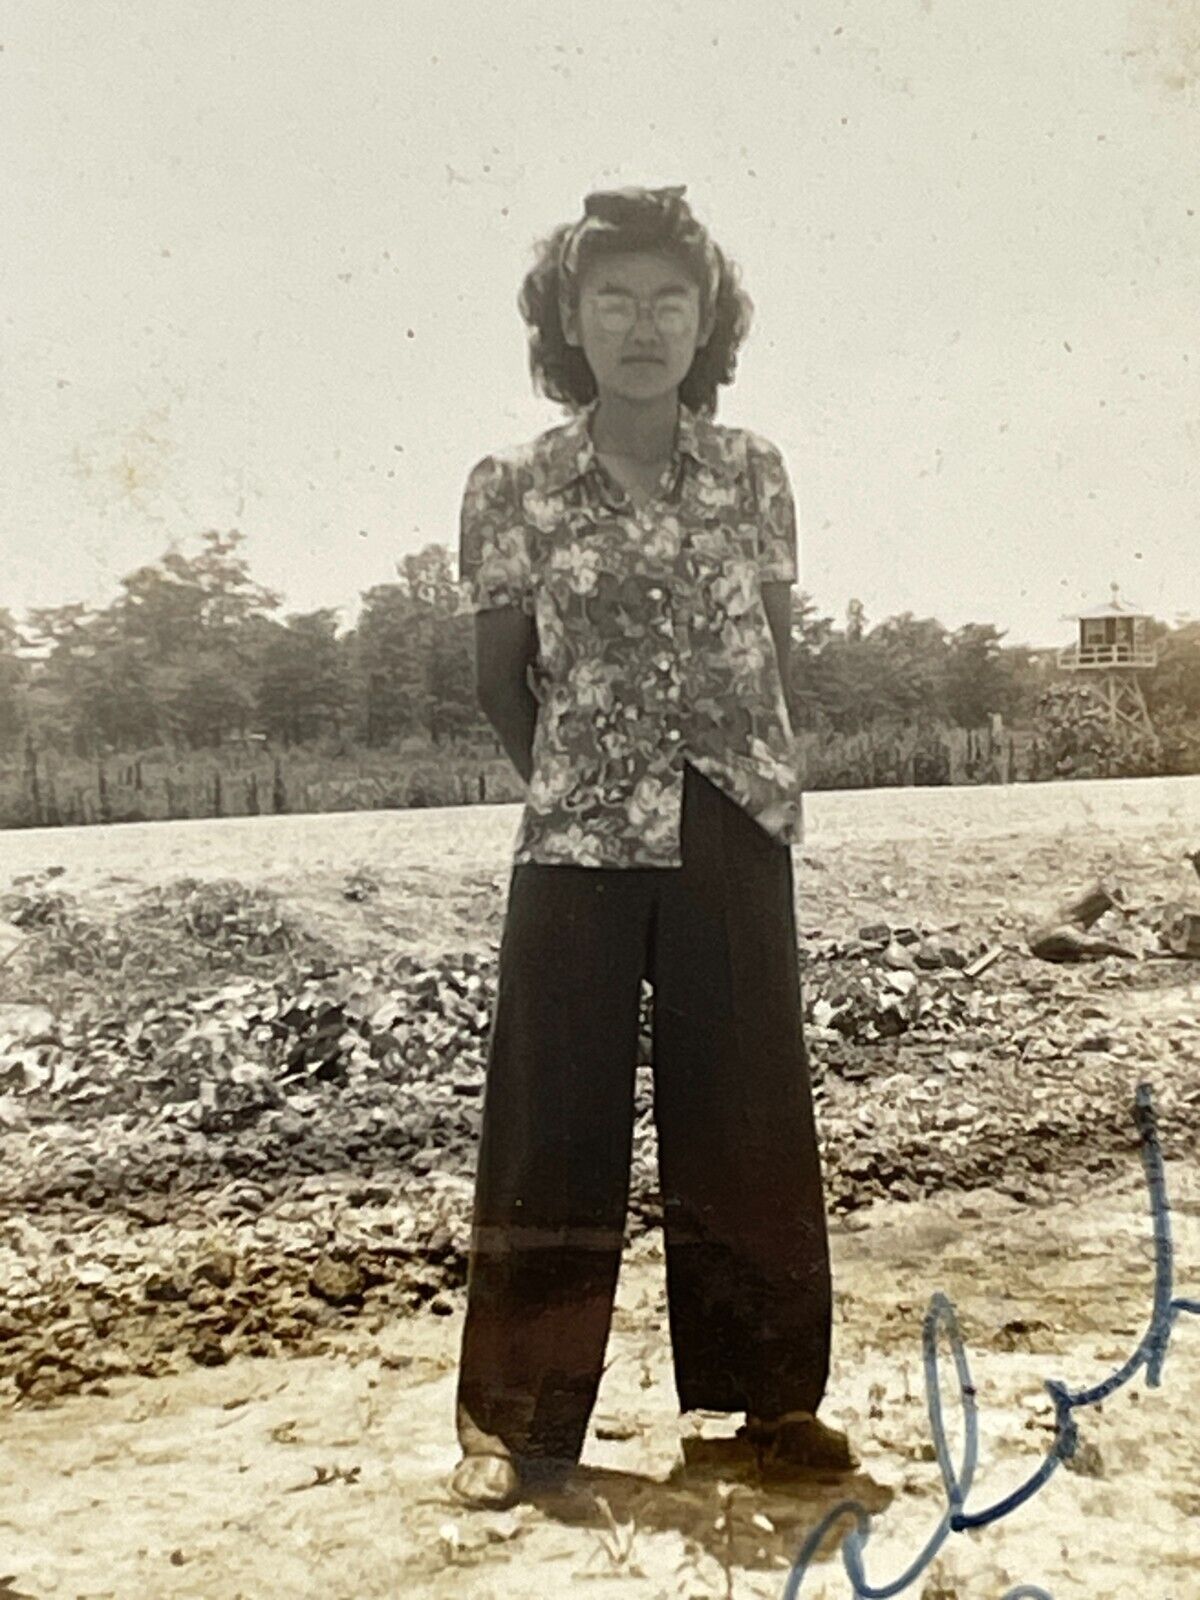 VA Photograph 1944 Pretty Lovely Lady 1940's Asian Floral Shirt